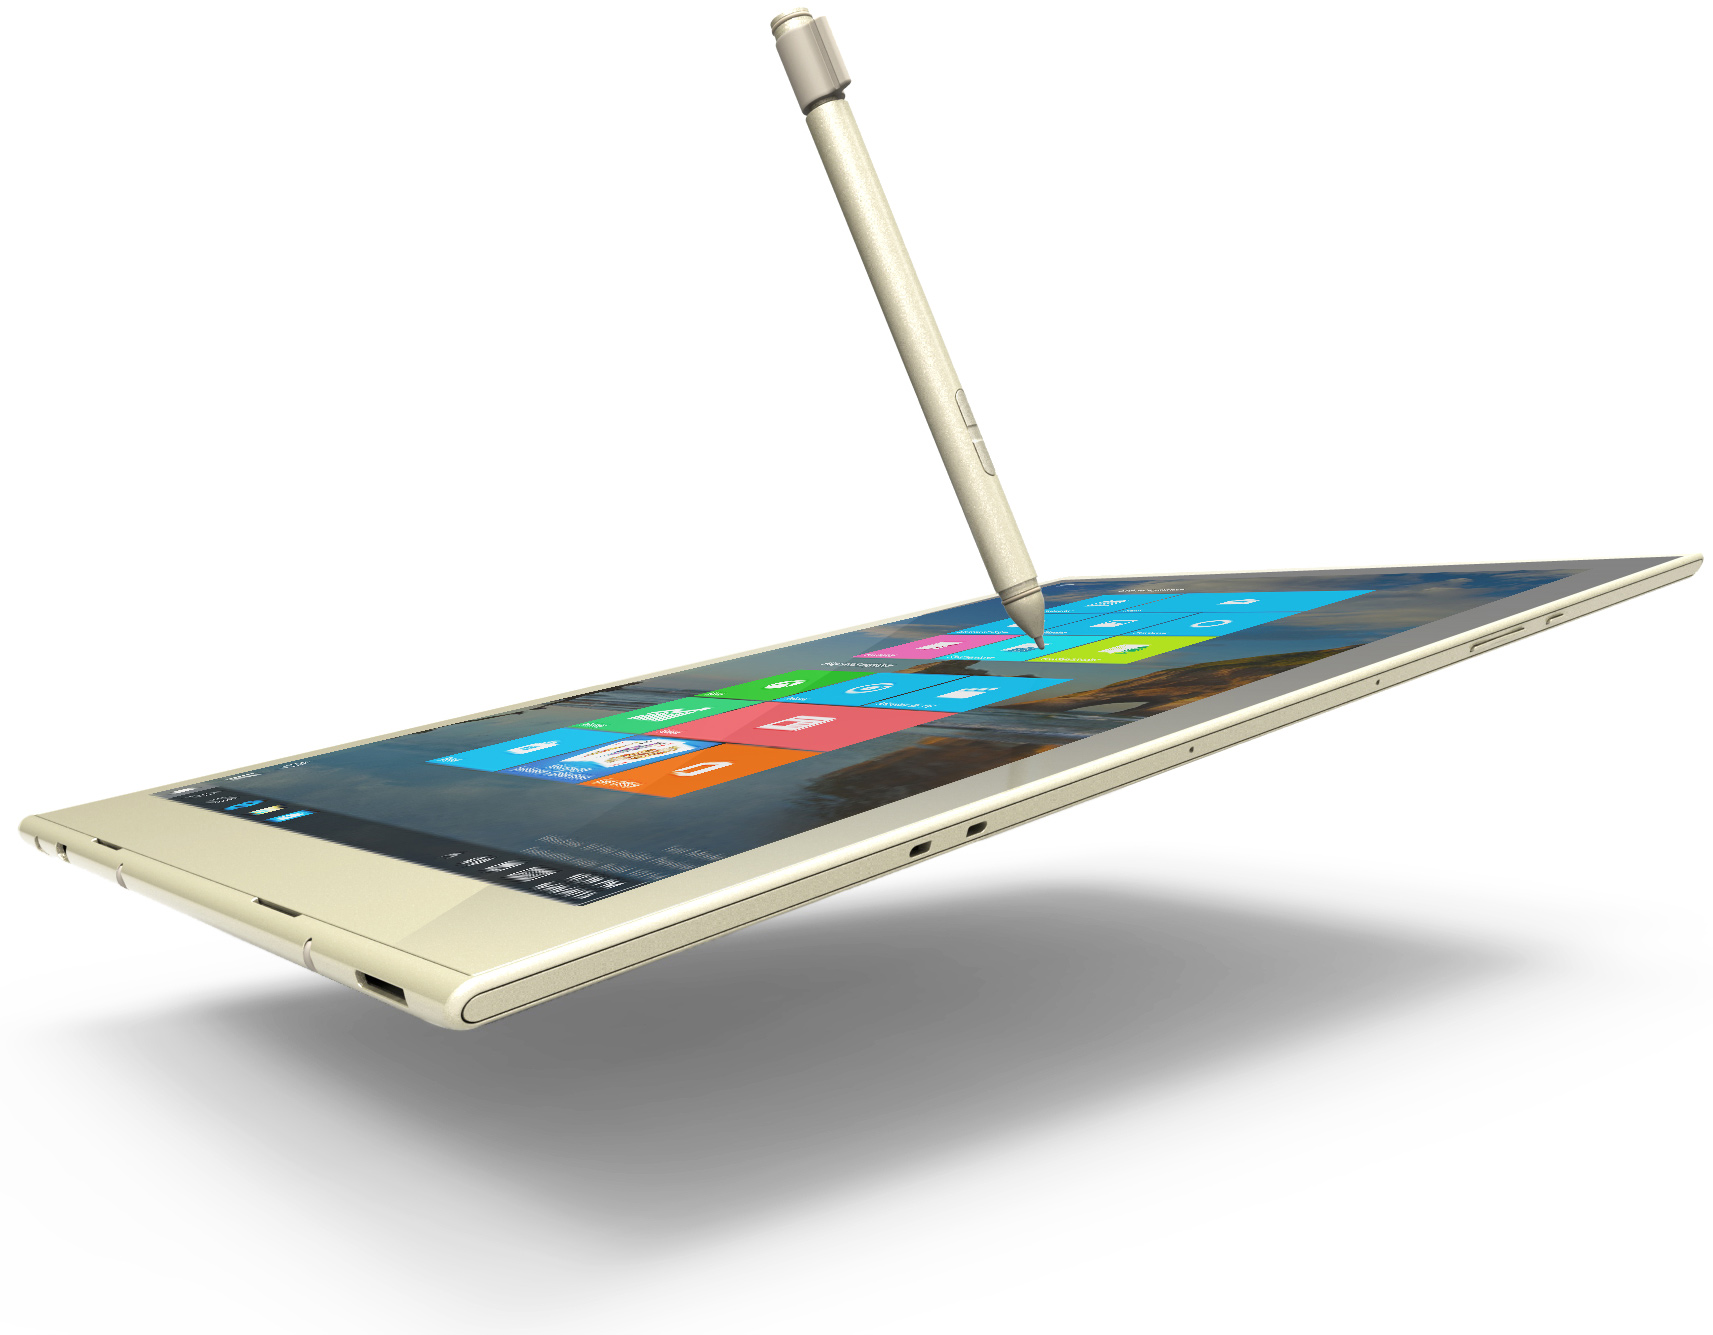 Toshiba's DynaPad Tablet to Hit Stores in Late January